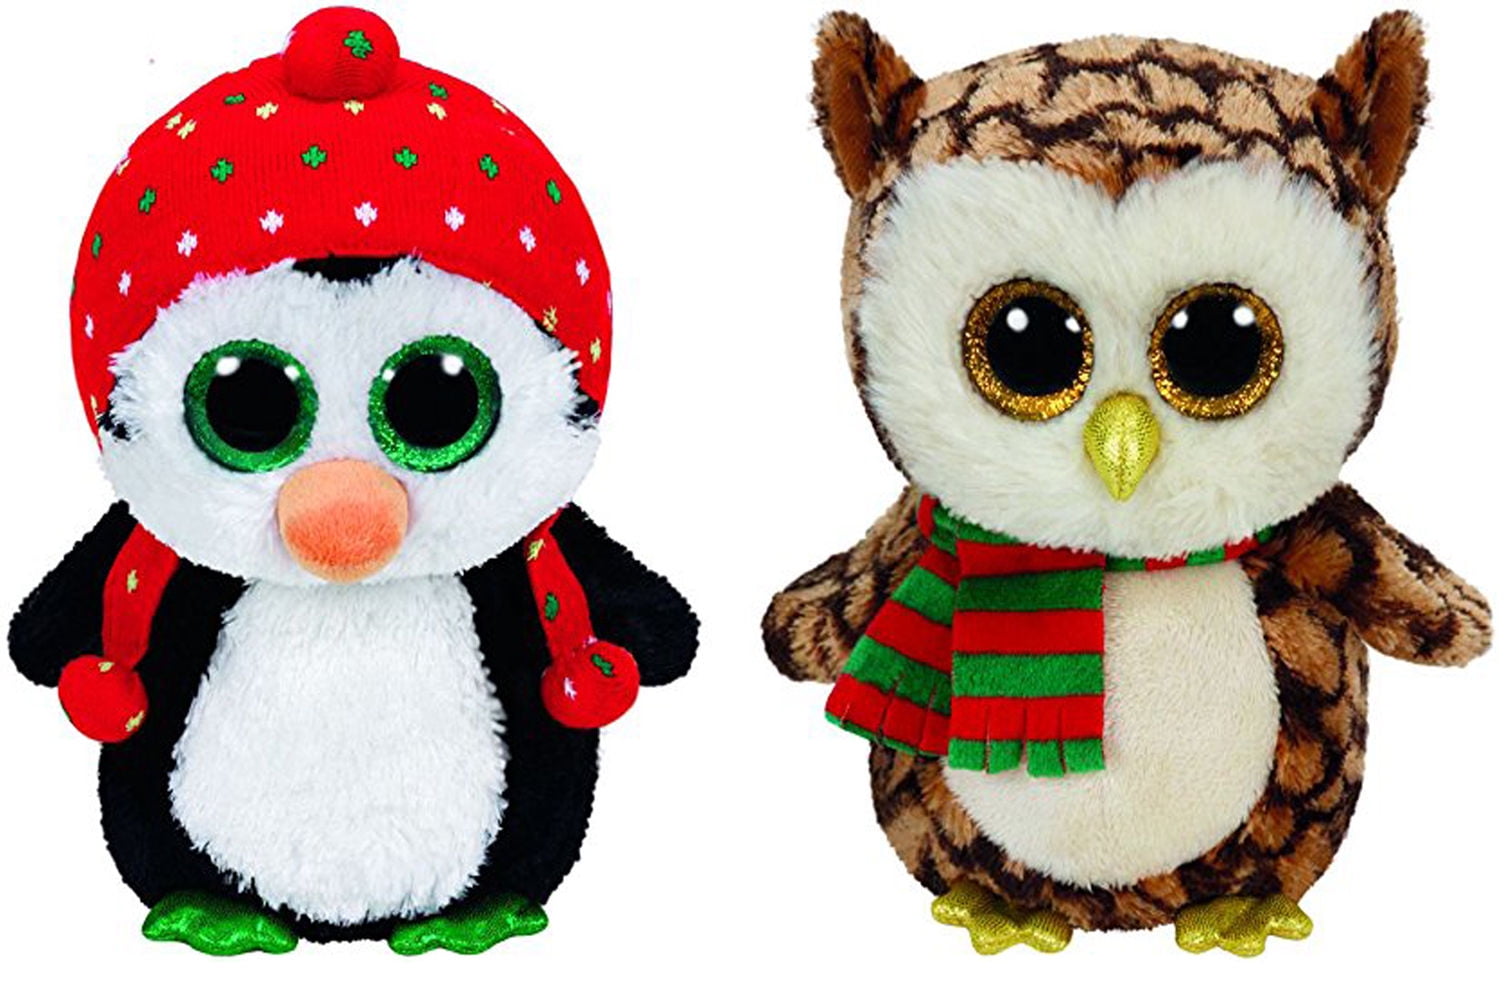 TY BEANIE BABIES CHRISTMAS 2015 FREEZE AND WISE OWL PLUSH SOFT TOYS TWIN SET 